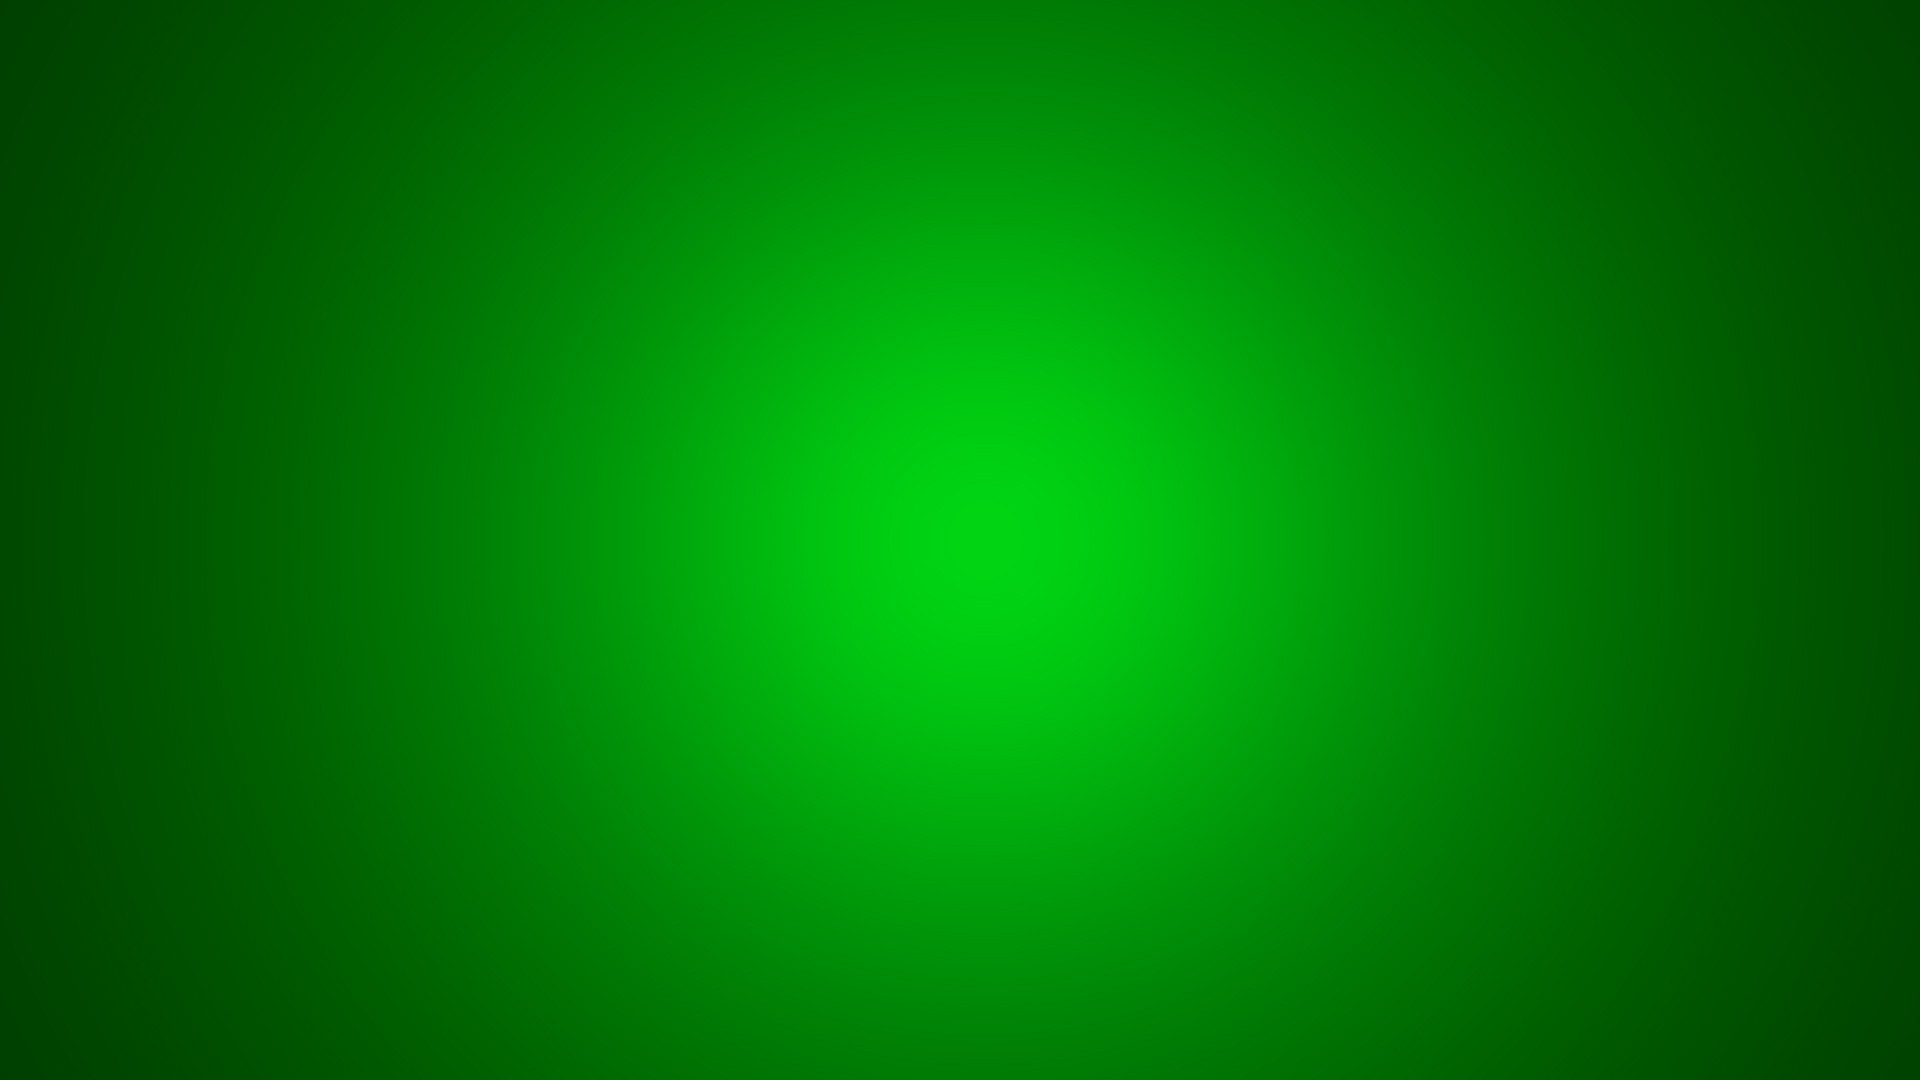 Green color background hd wallpaper - cyclevsa